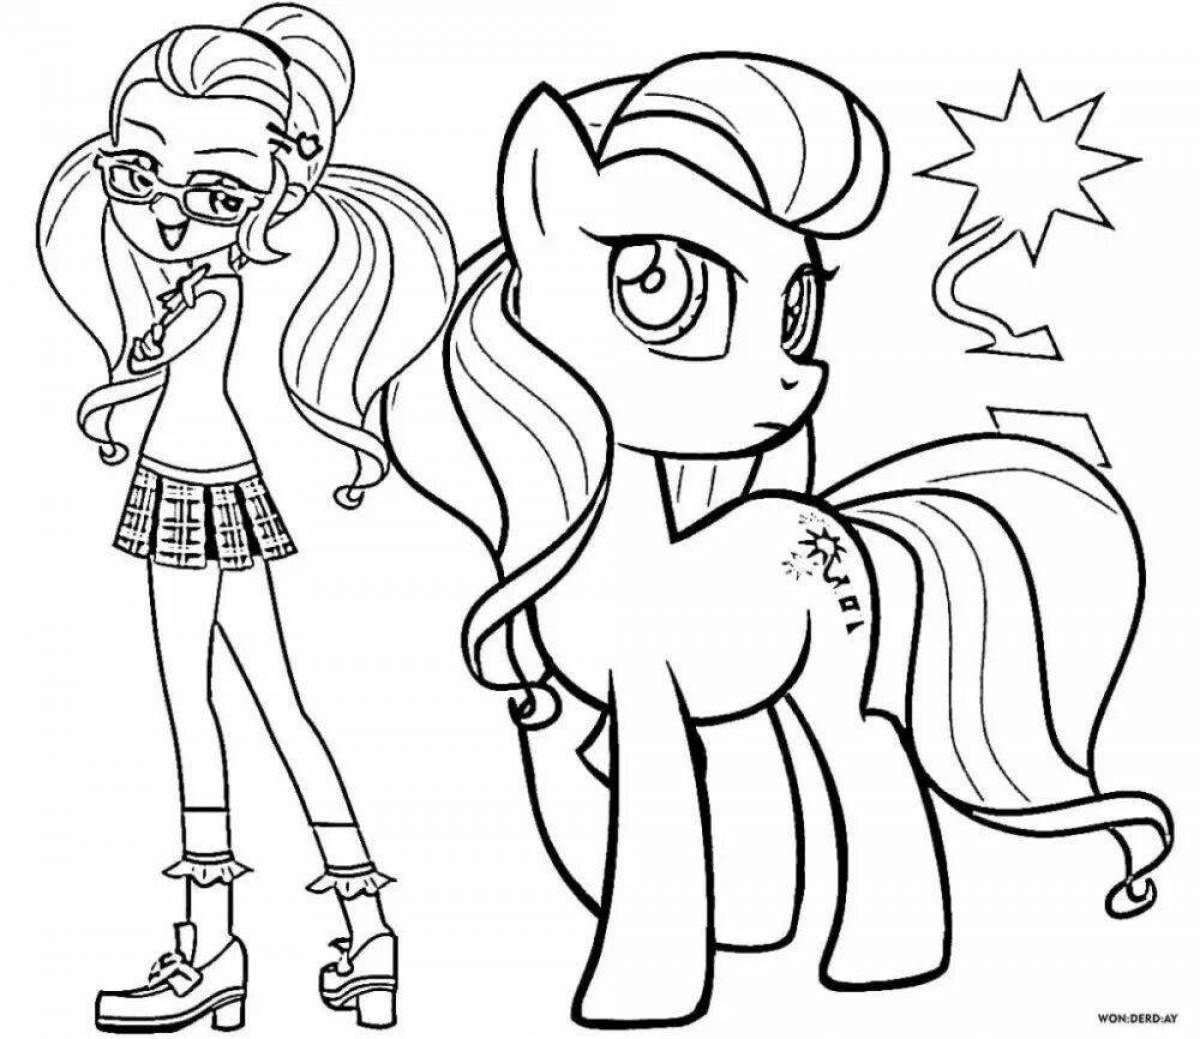 Cute pony doll coloring page